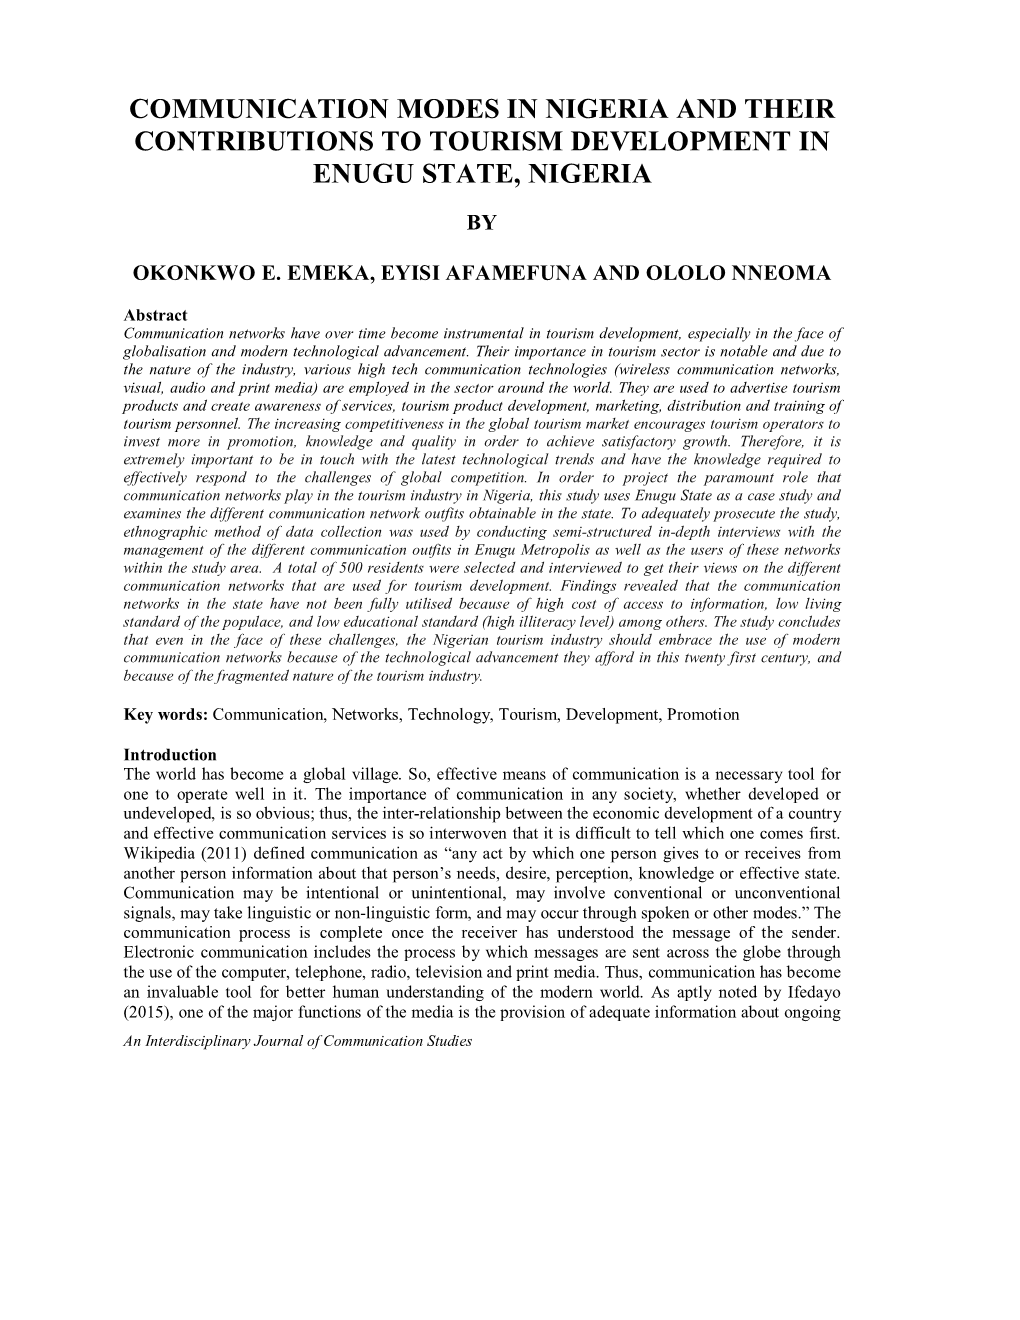 Communication Modes in Nigeria and Their Contributions to Tourism Development in Enugu State, Nigeria